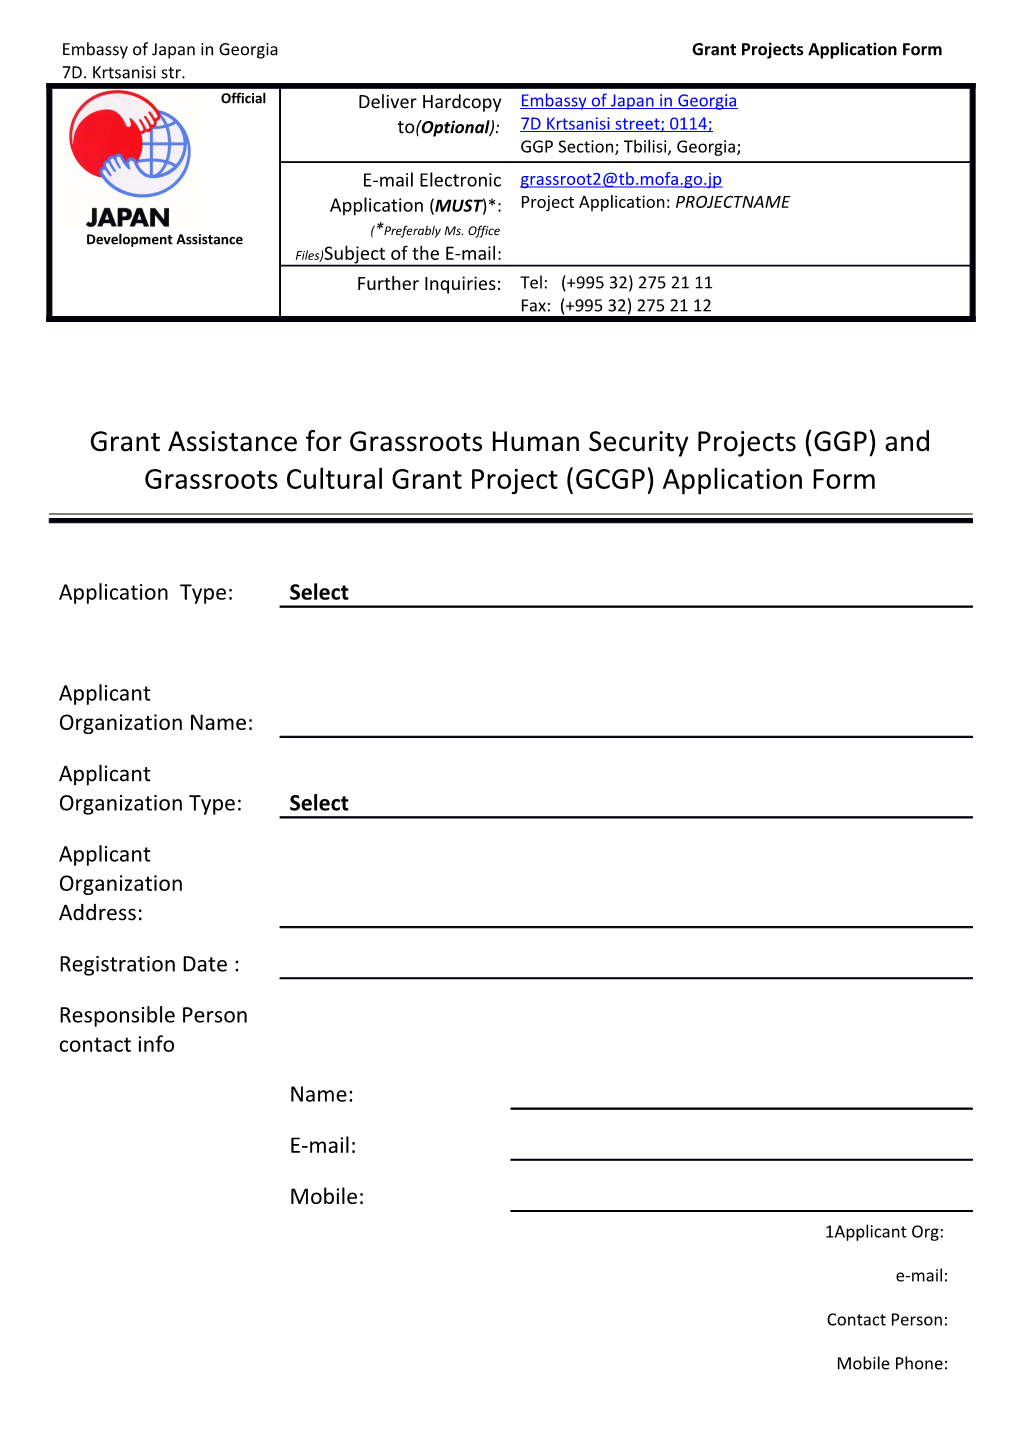 Embassy of Japan in Georgia Grant Projects Application Form